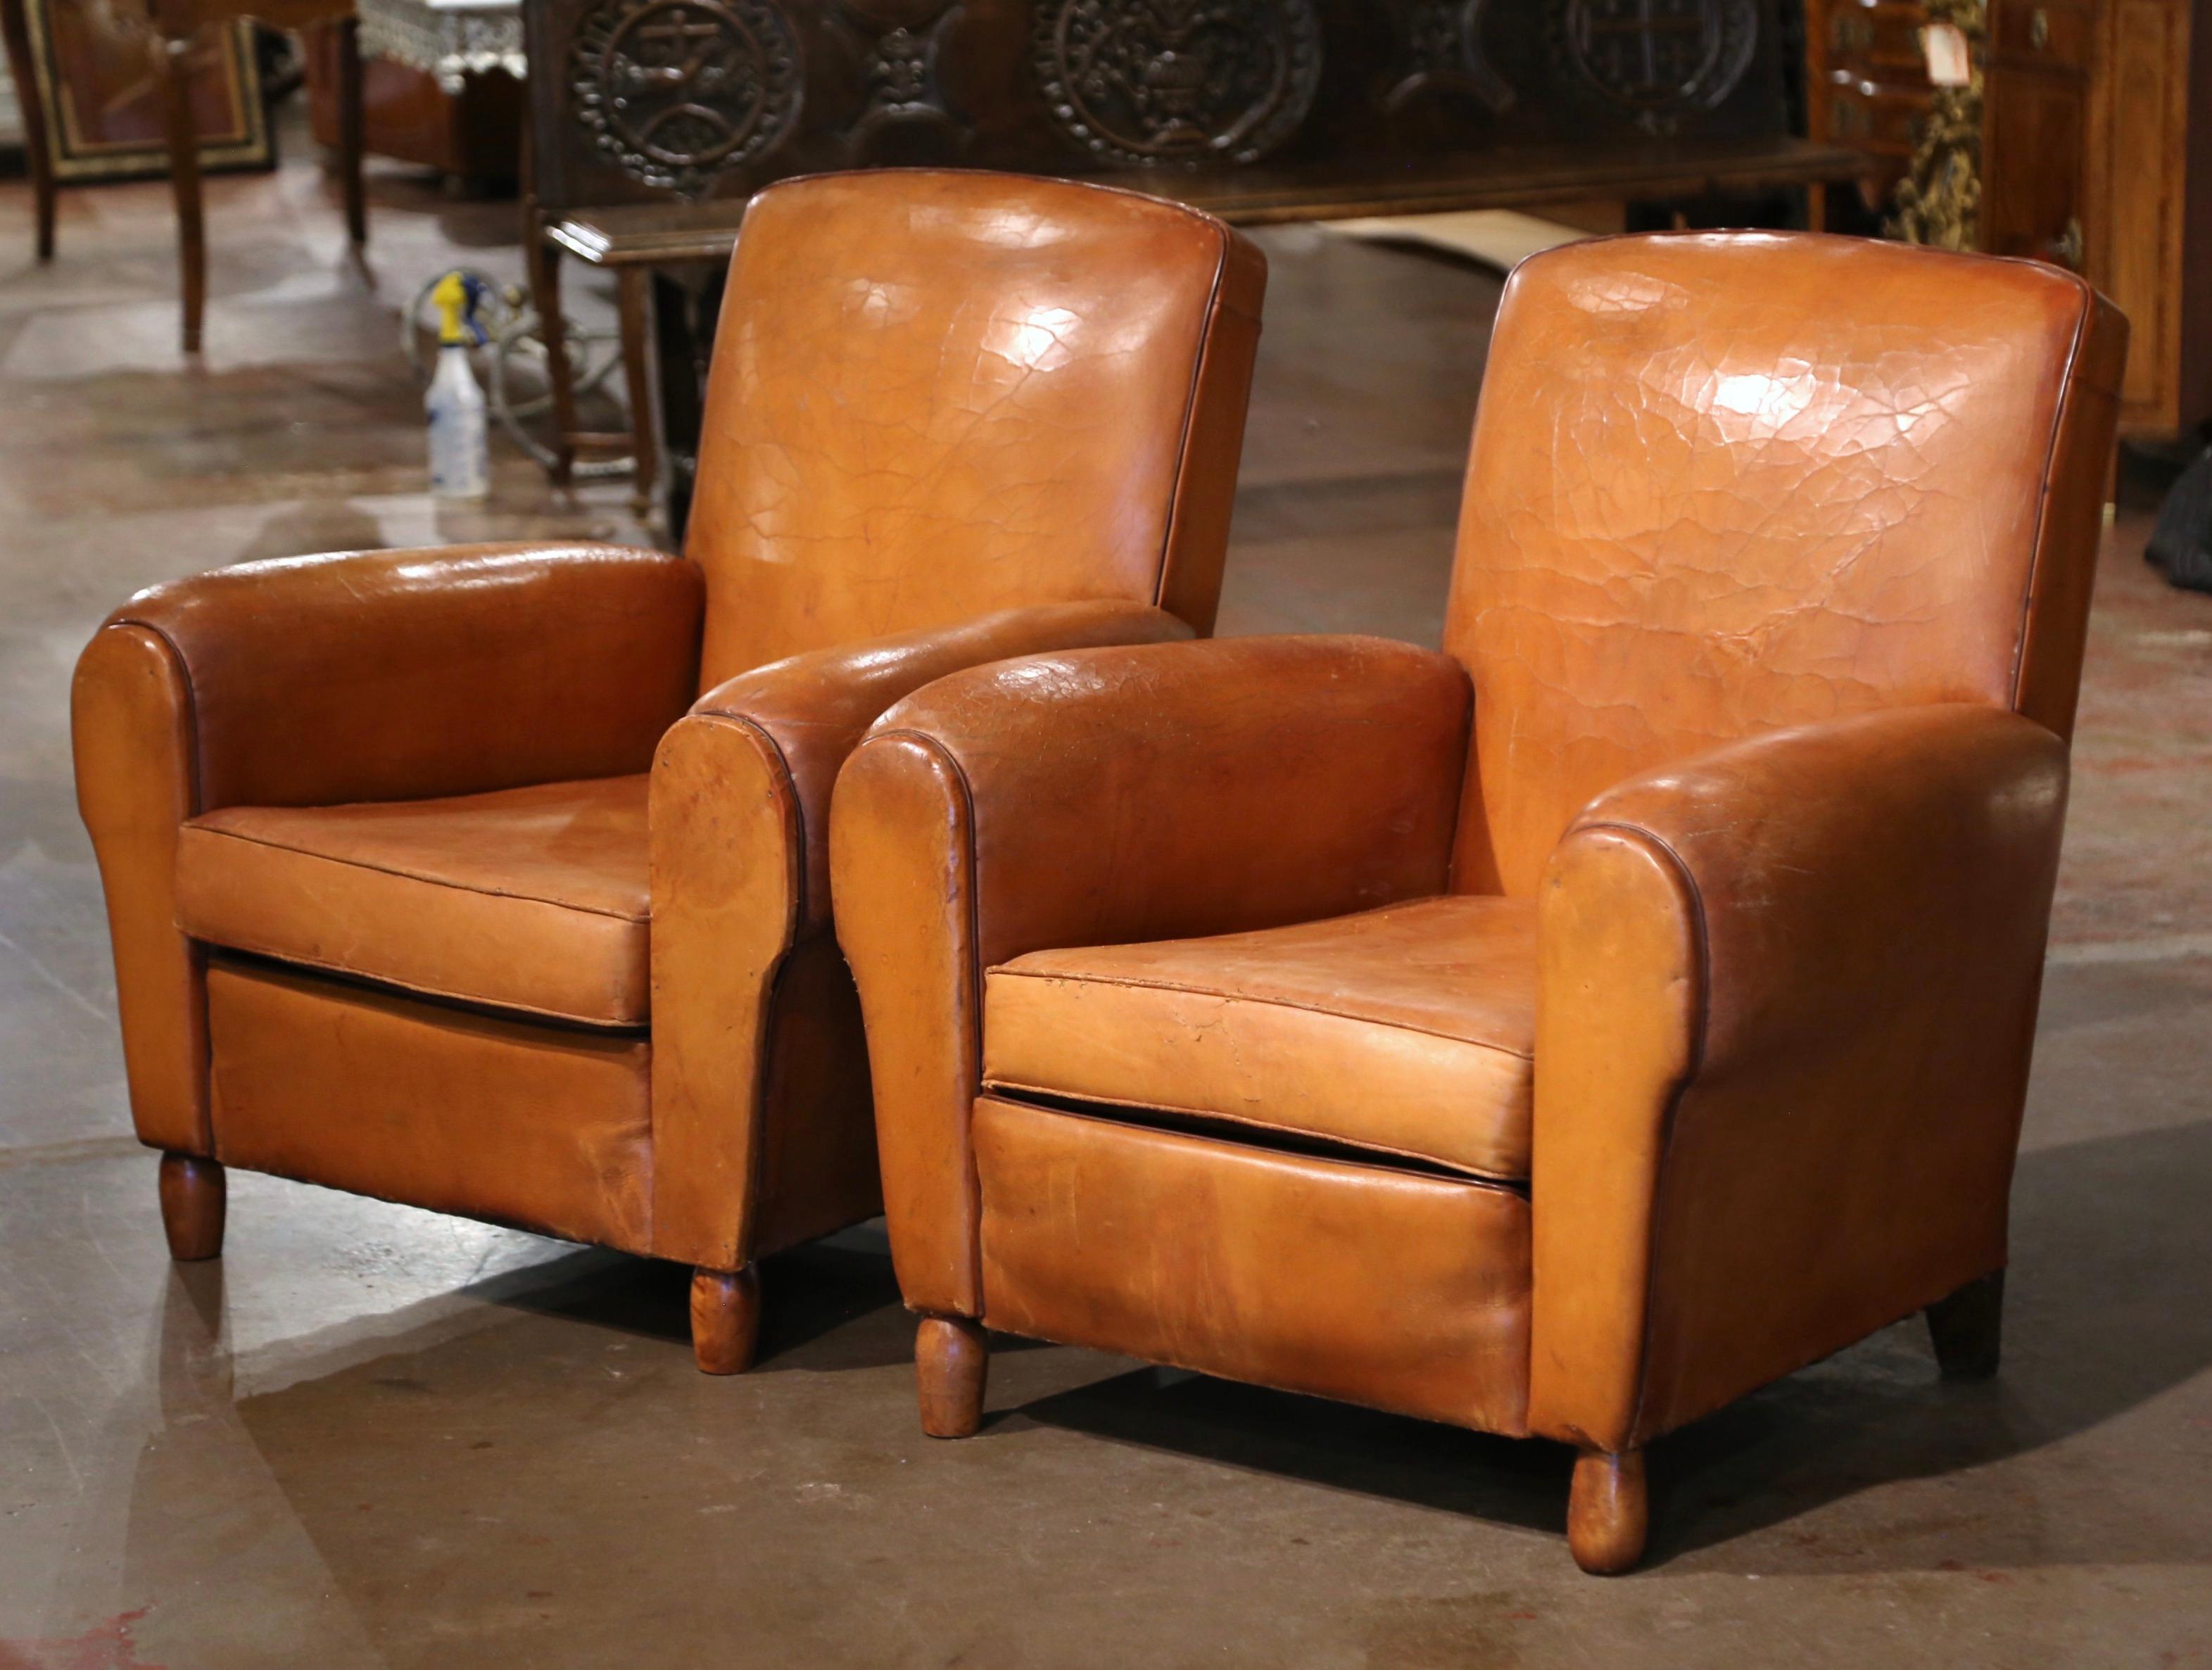 These Classic, antique Art Deco club chairs were crafted in France, circa 1920. The stately chairs stand on round wooden feet and feature wide, rounded armrests, a pitch back with an arched top shape. The Classic, masculine French fauteuils with